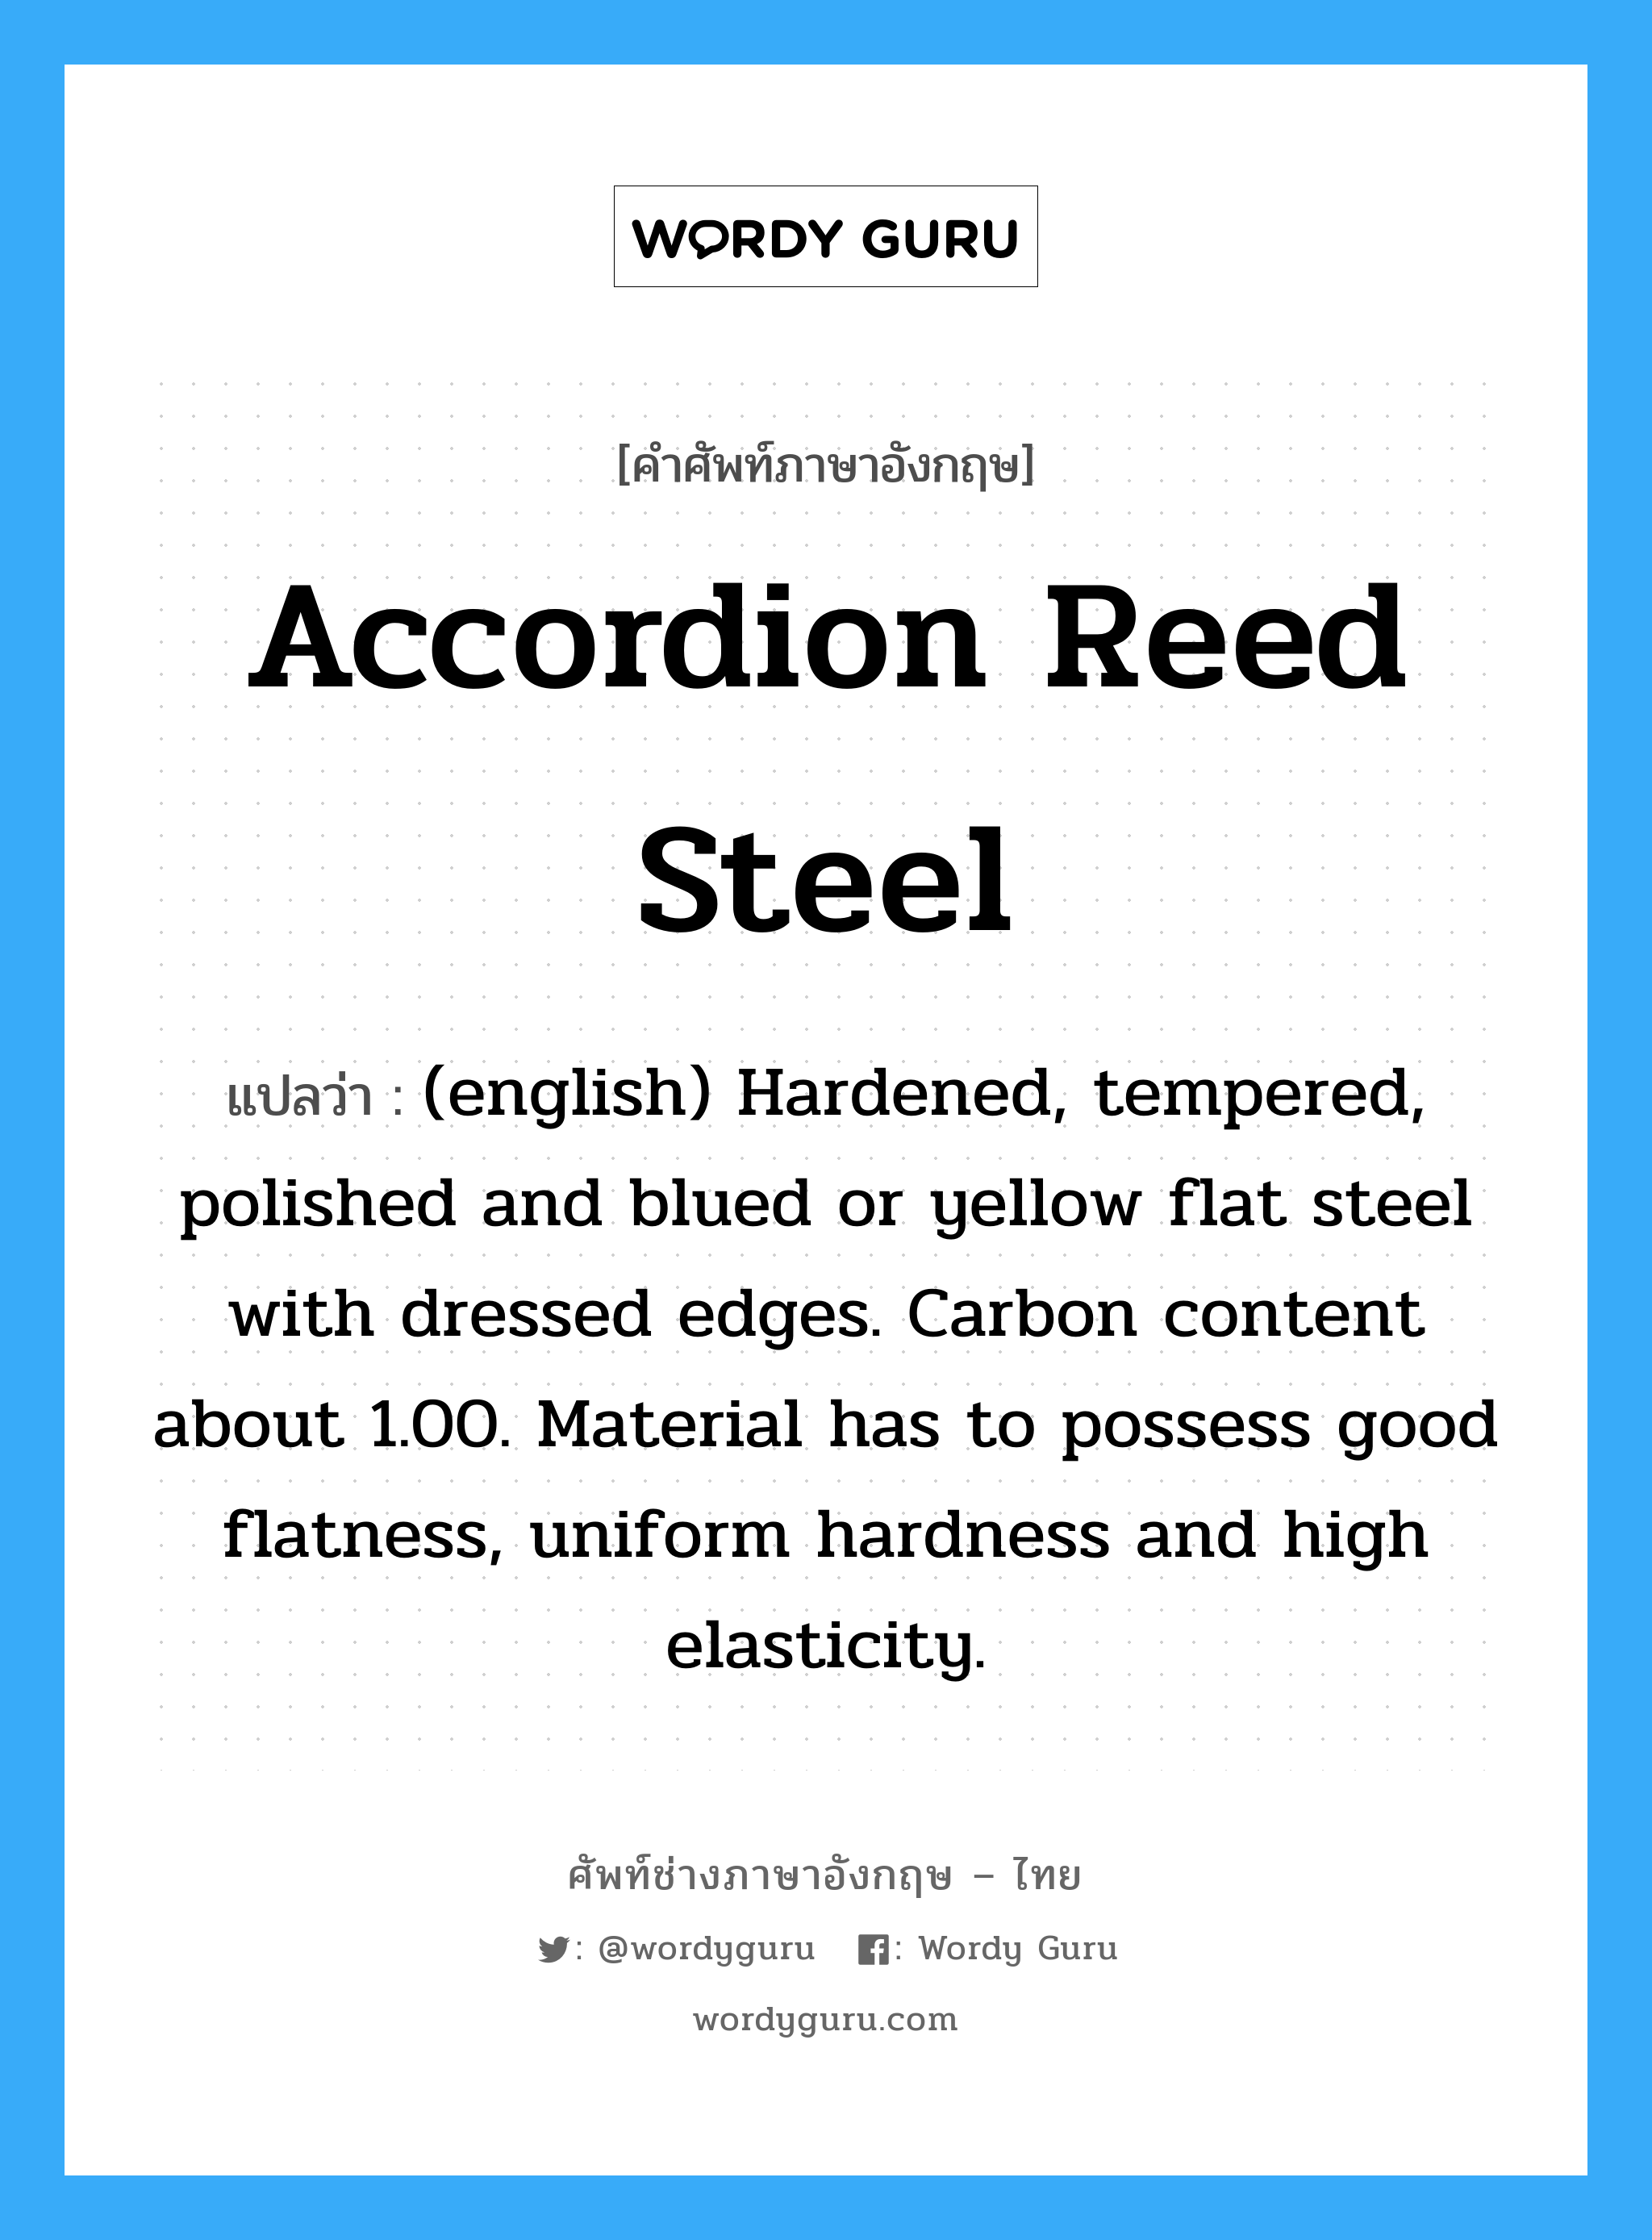 (english) Hardened, tempered, polished and blued or yellow flat steel with dressed edges. Carbon content about 1.00. Material has to possess good flatness, uniform hardness and high elasticity. ภาษาอังกฤษ?, คำศัพท์ช่างภาษาอังกฤษ - ไทย (english) Hardened, tempered, polished and blued or yellow flat steel with dressed edges. Carbon content about 1.00. Material has to possess good flatness, uniform hardness and high elasticity. คำศัพท์ภาษาอังกฤษ (english) Hardened, tempered, polished and blued or yellow flat steel with dressed edges. Carbon content about 1.00. Material has to possess good flatness, uniform hardness and high elasticity. แปลว่า Accordion Reed Steel